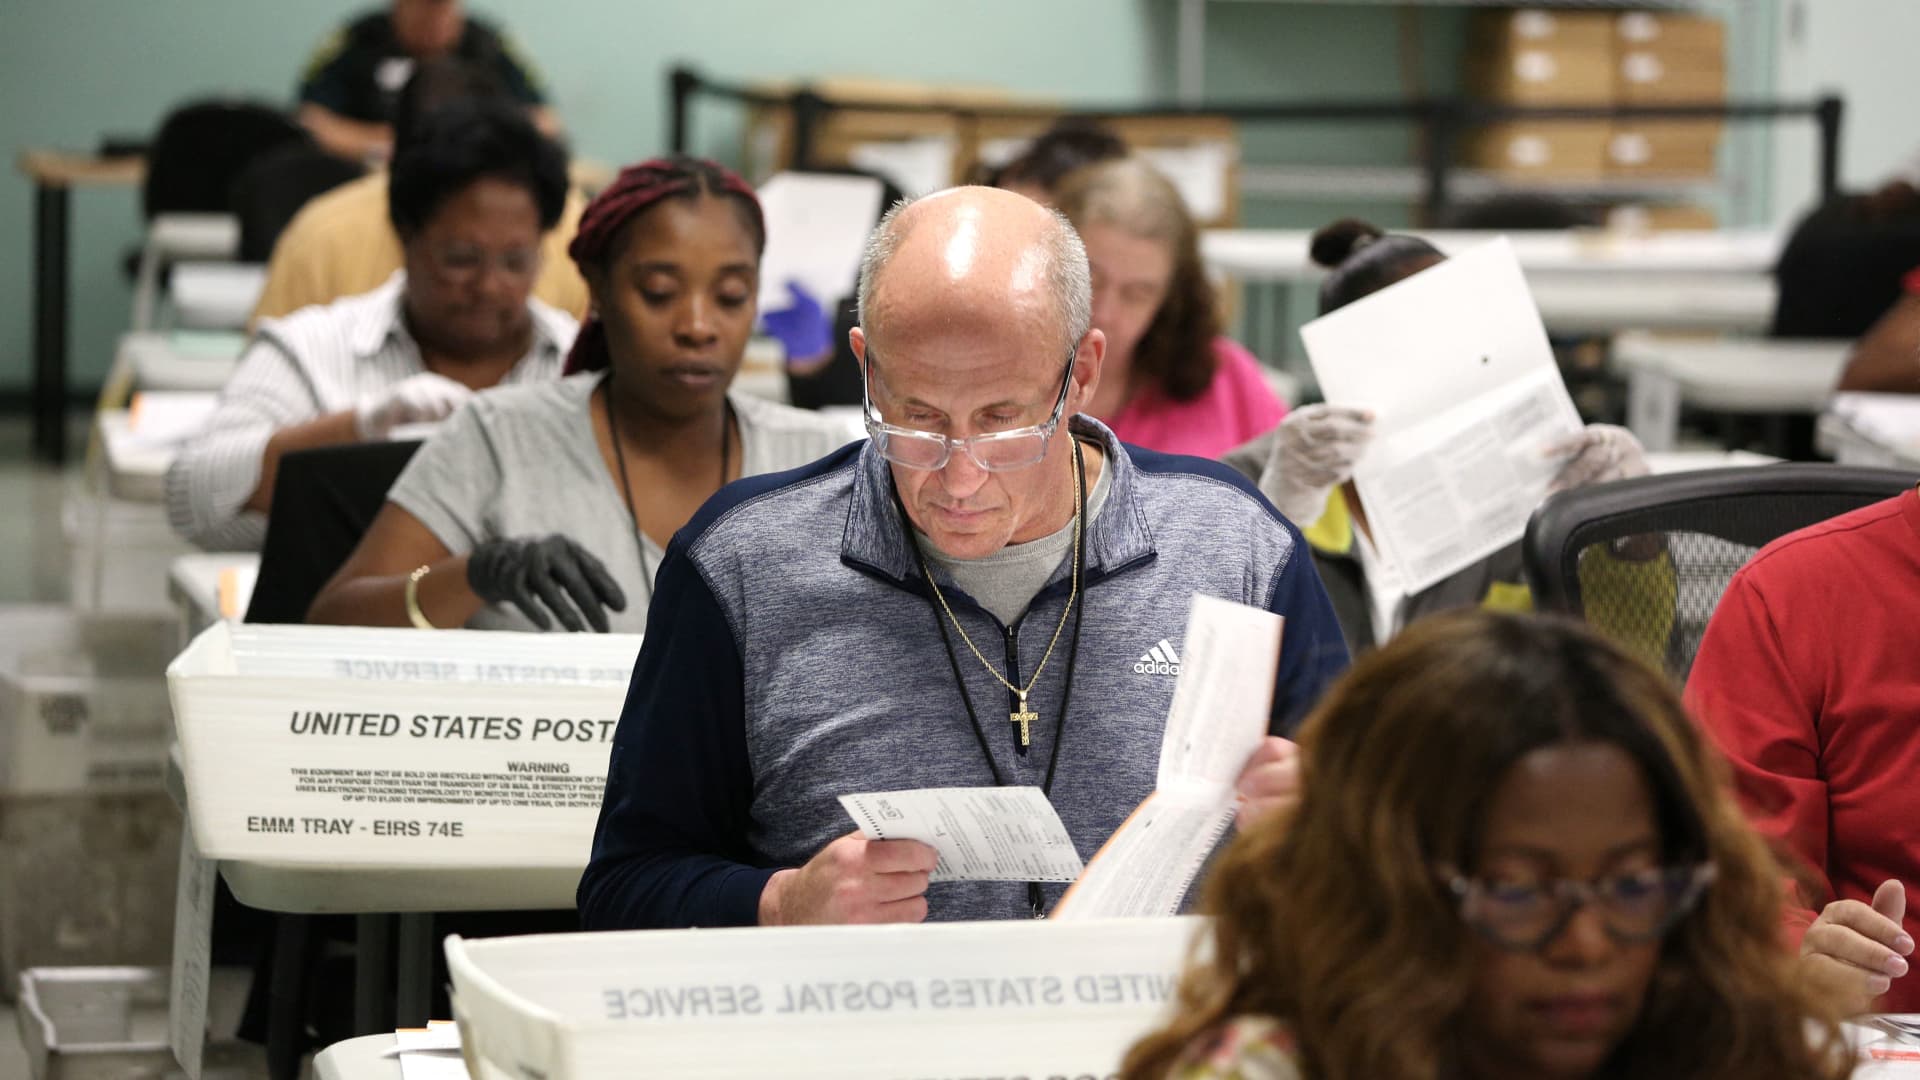 Election workers separate verified ballots from their envelopes at the Orange County Supervisor of Elections headquarters on the eve of the US midterm elections, in Orlando, Florida, on November 7, 2022.